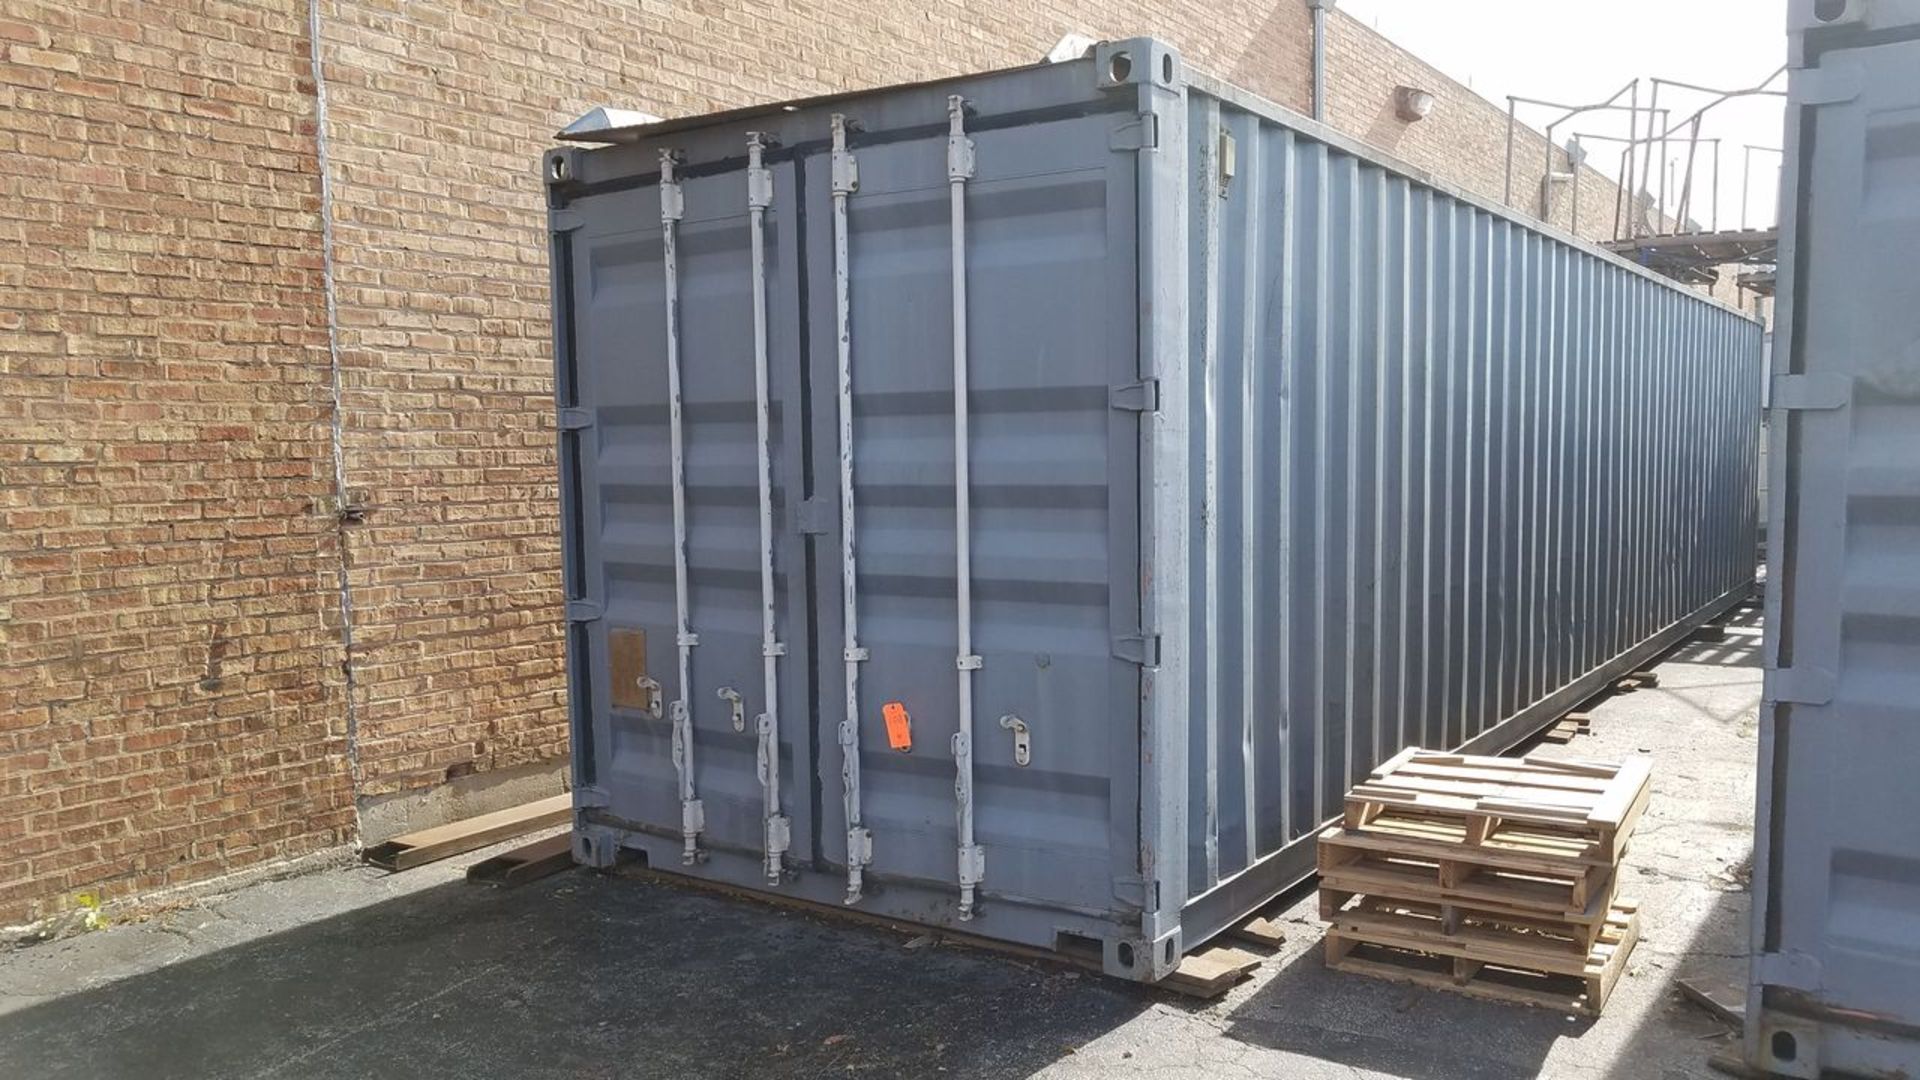 Ningbo Xinhuachang Intl Containers Co. 40 ft. Model CX03-40TTN Shipping Container, S/N: CXIC-